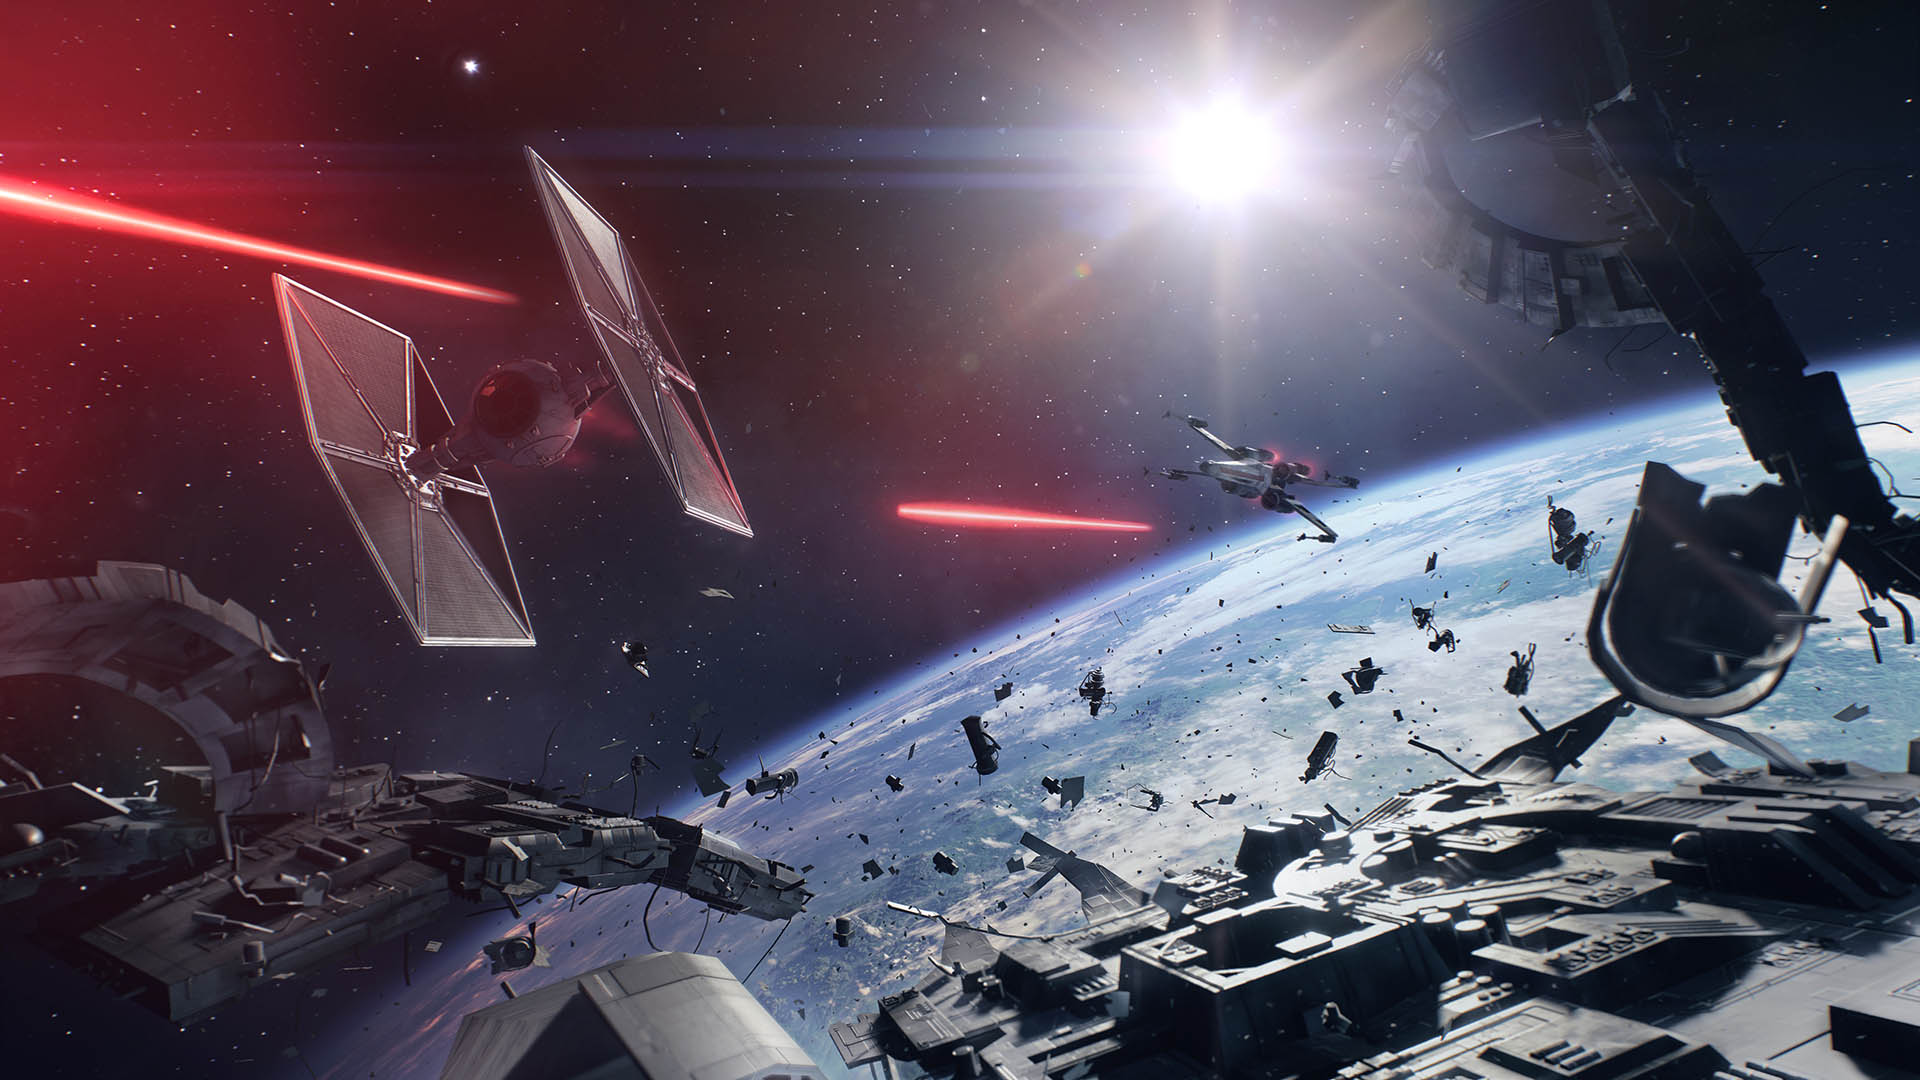 Star Wars Battlefront 2: Celebration Edition is free on the Epic Store